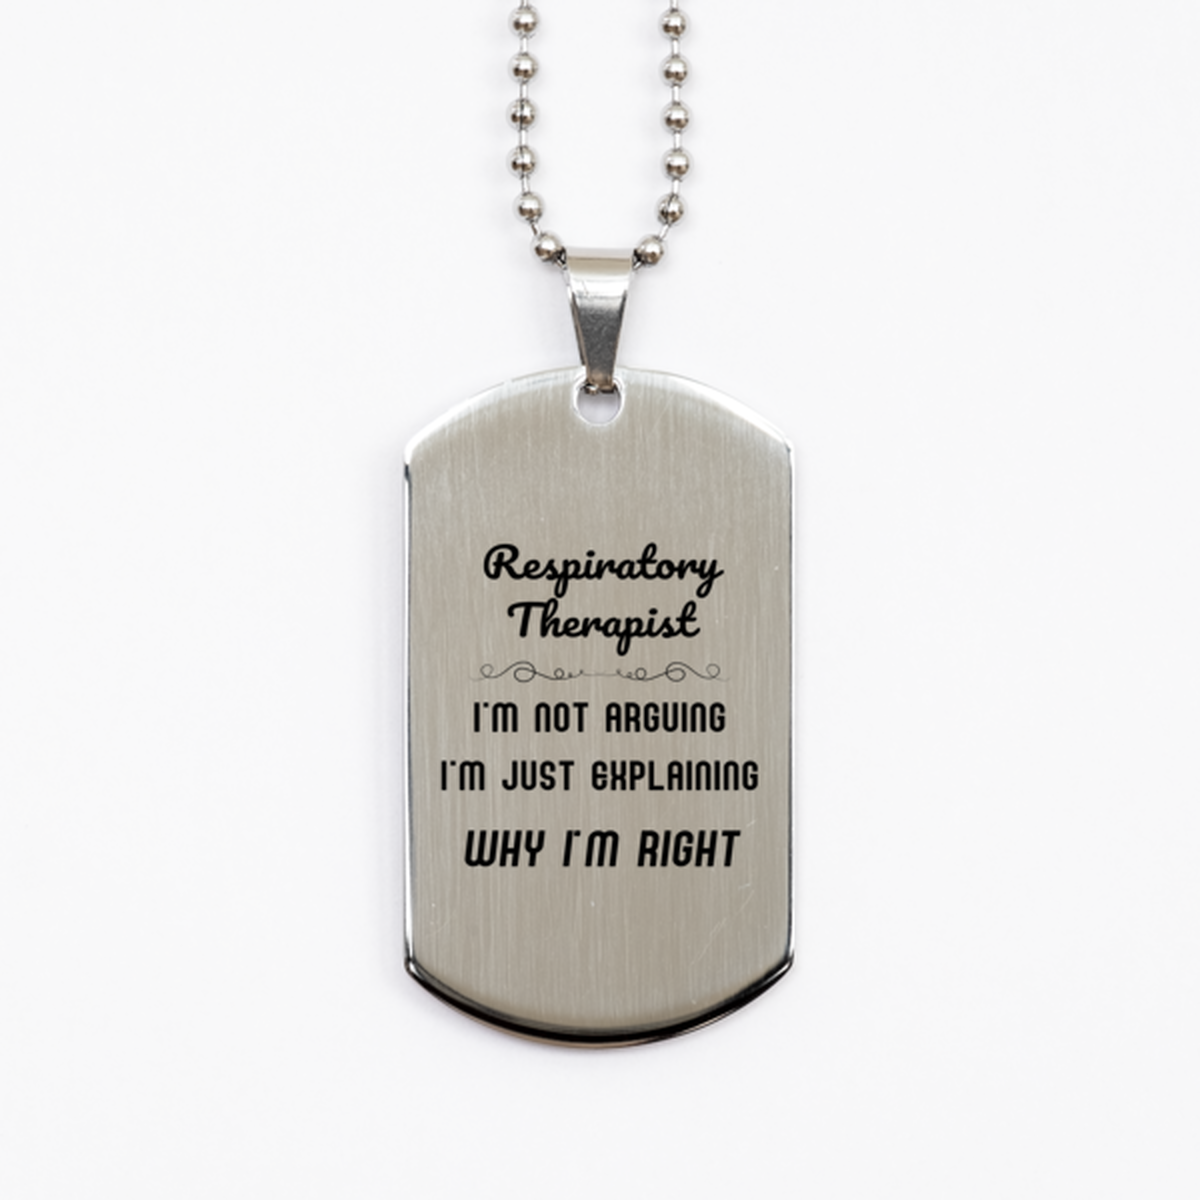 Respiratory Therapist I'm not Arguing. I'm Just Explaining Why I'm RIGHT Silver Dog Tag, Funny Saying Quote Respiratory Therapist Gifts For Respiratory Therapist Graduation Birthday Christmas Gifts for Men Women Coworker